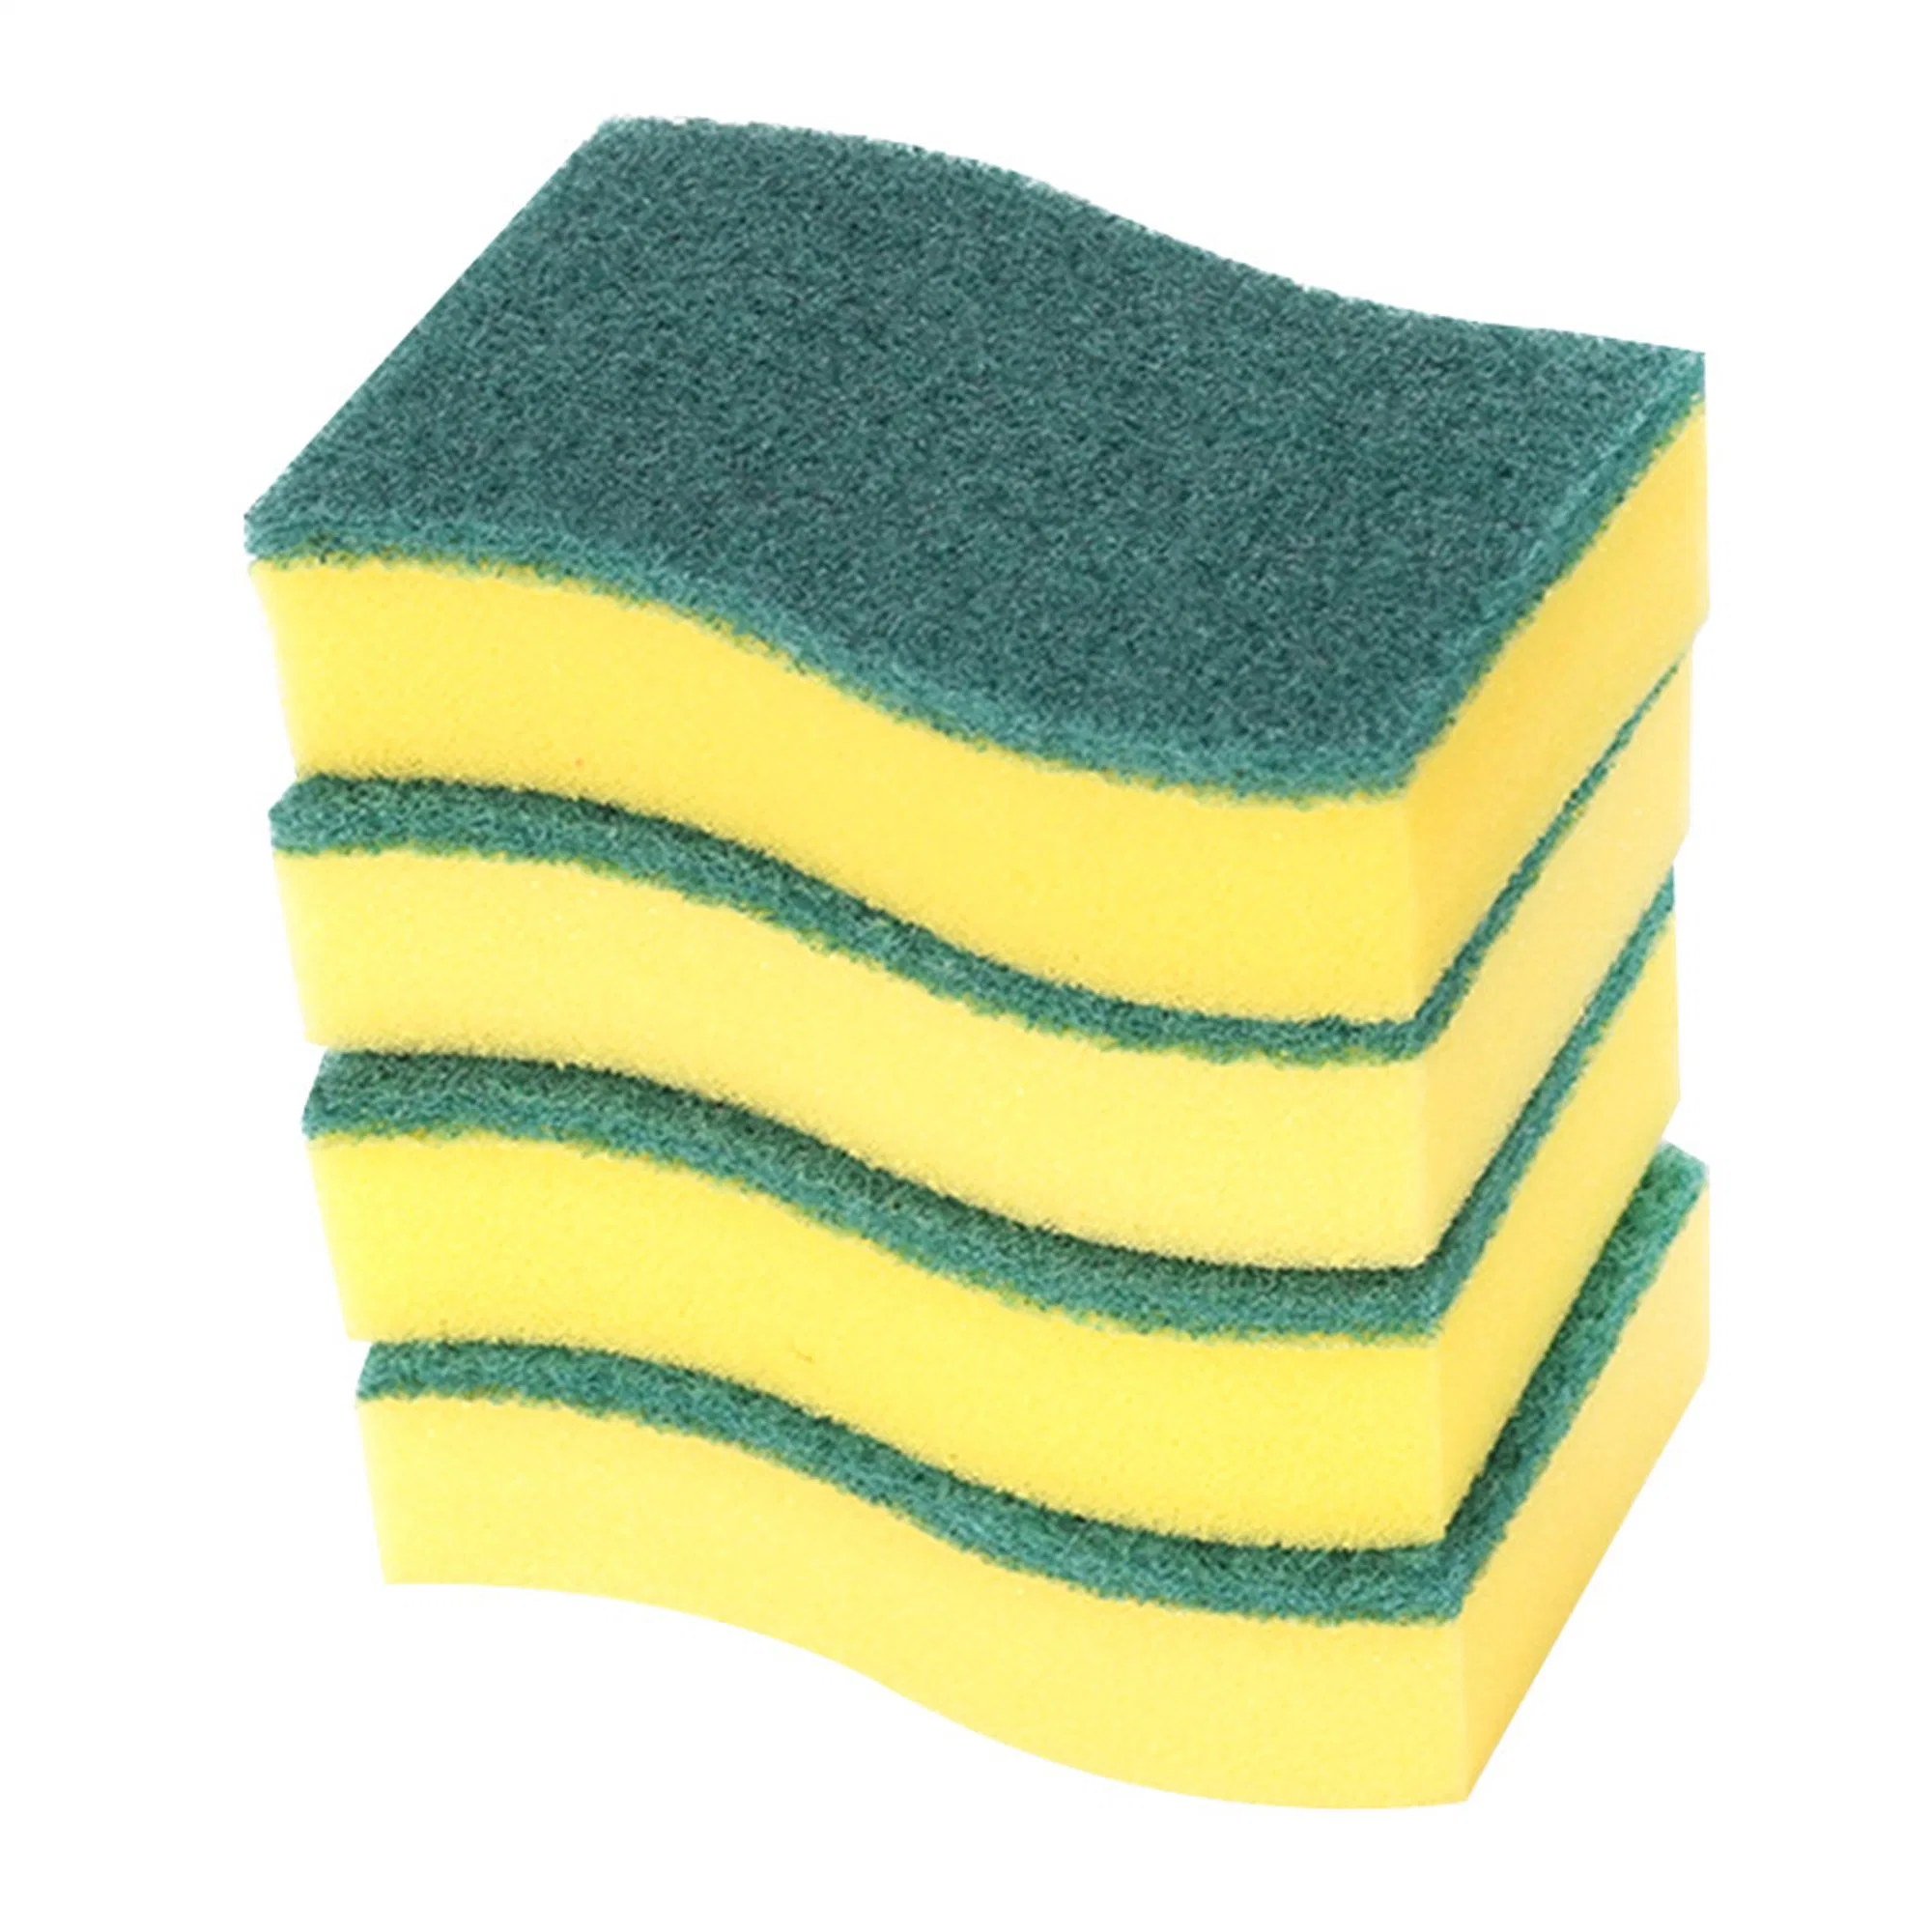 Sponge Stink Free Sponge Effortless Cleaning for Dishes Pots Pans All at Once Scrub Sponge-12count Cleaning Scrub